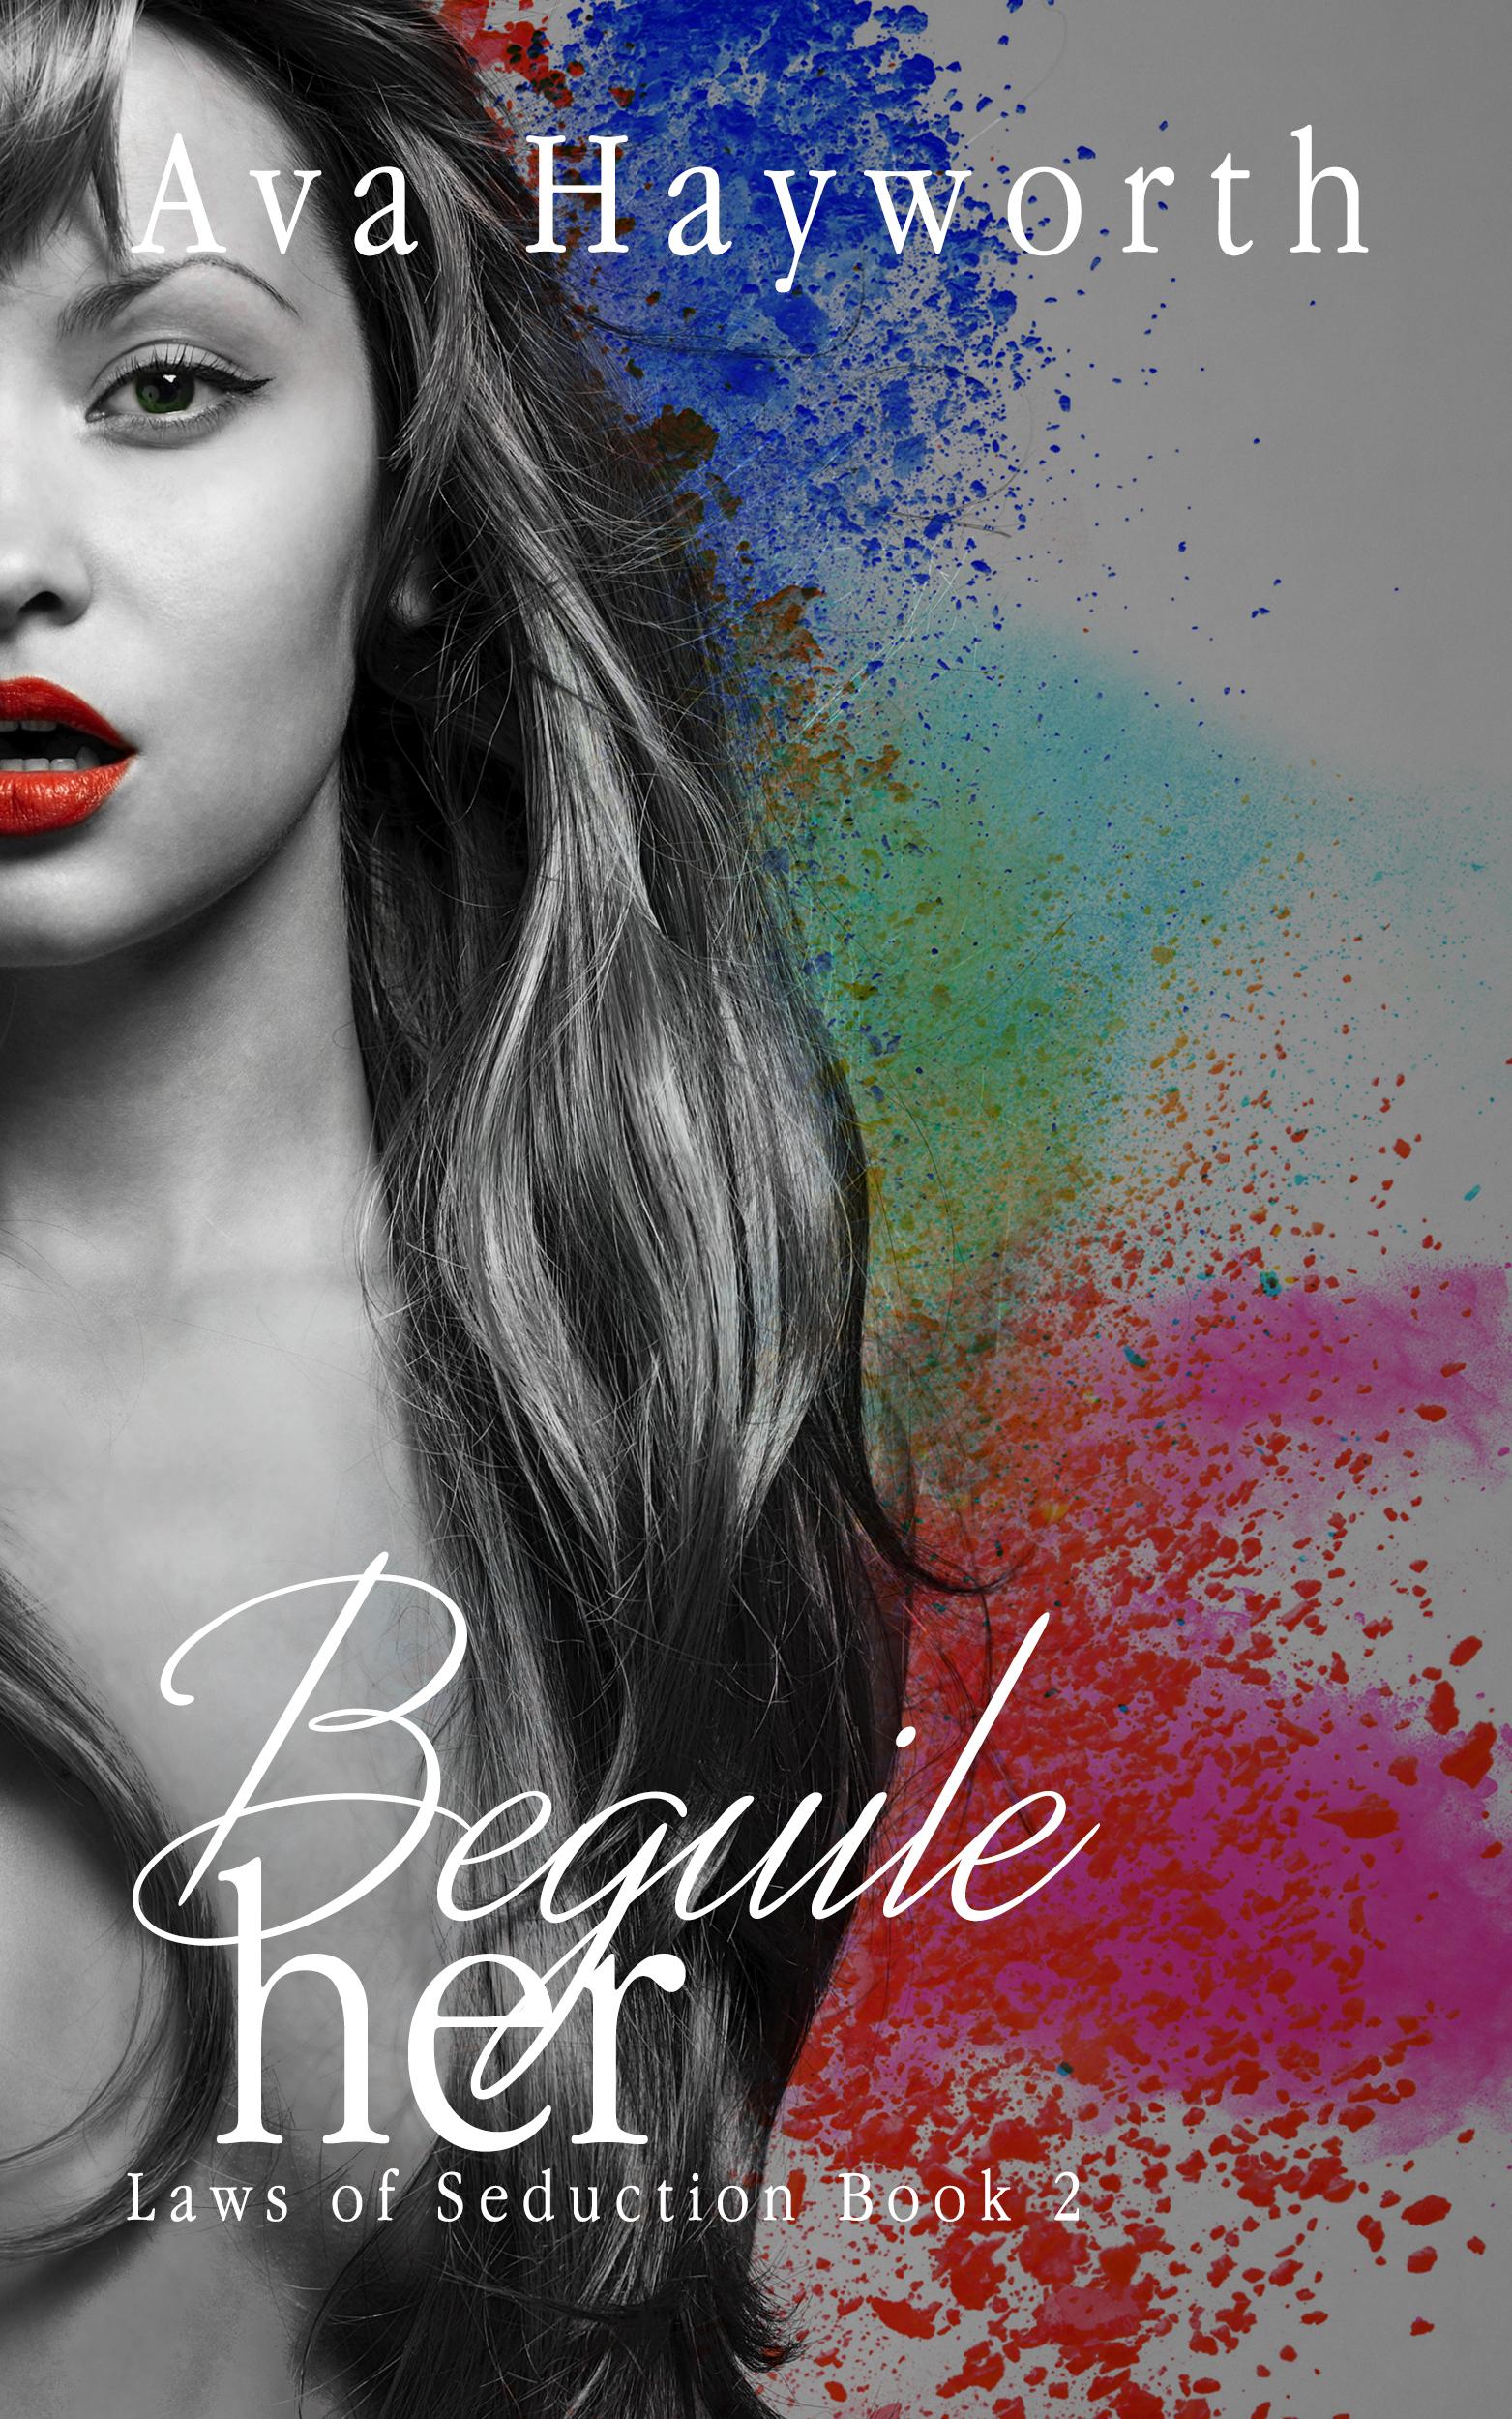 Beguile her